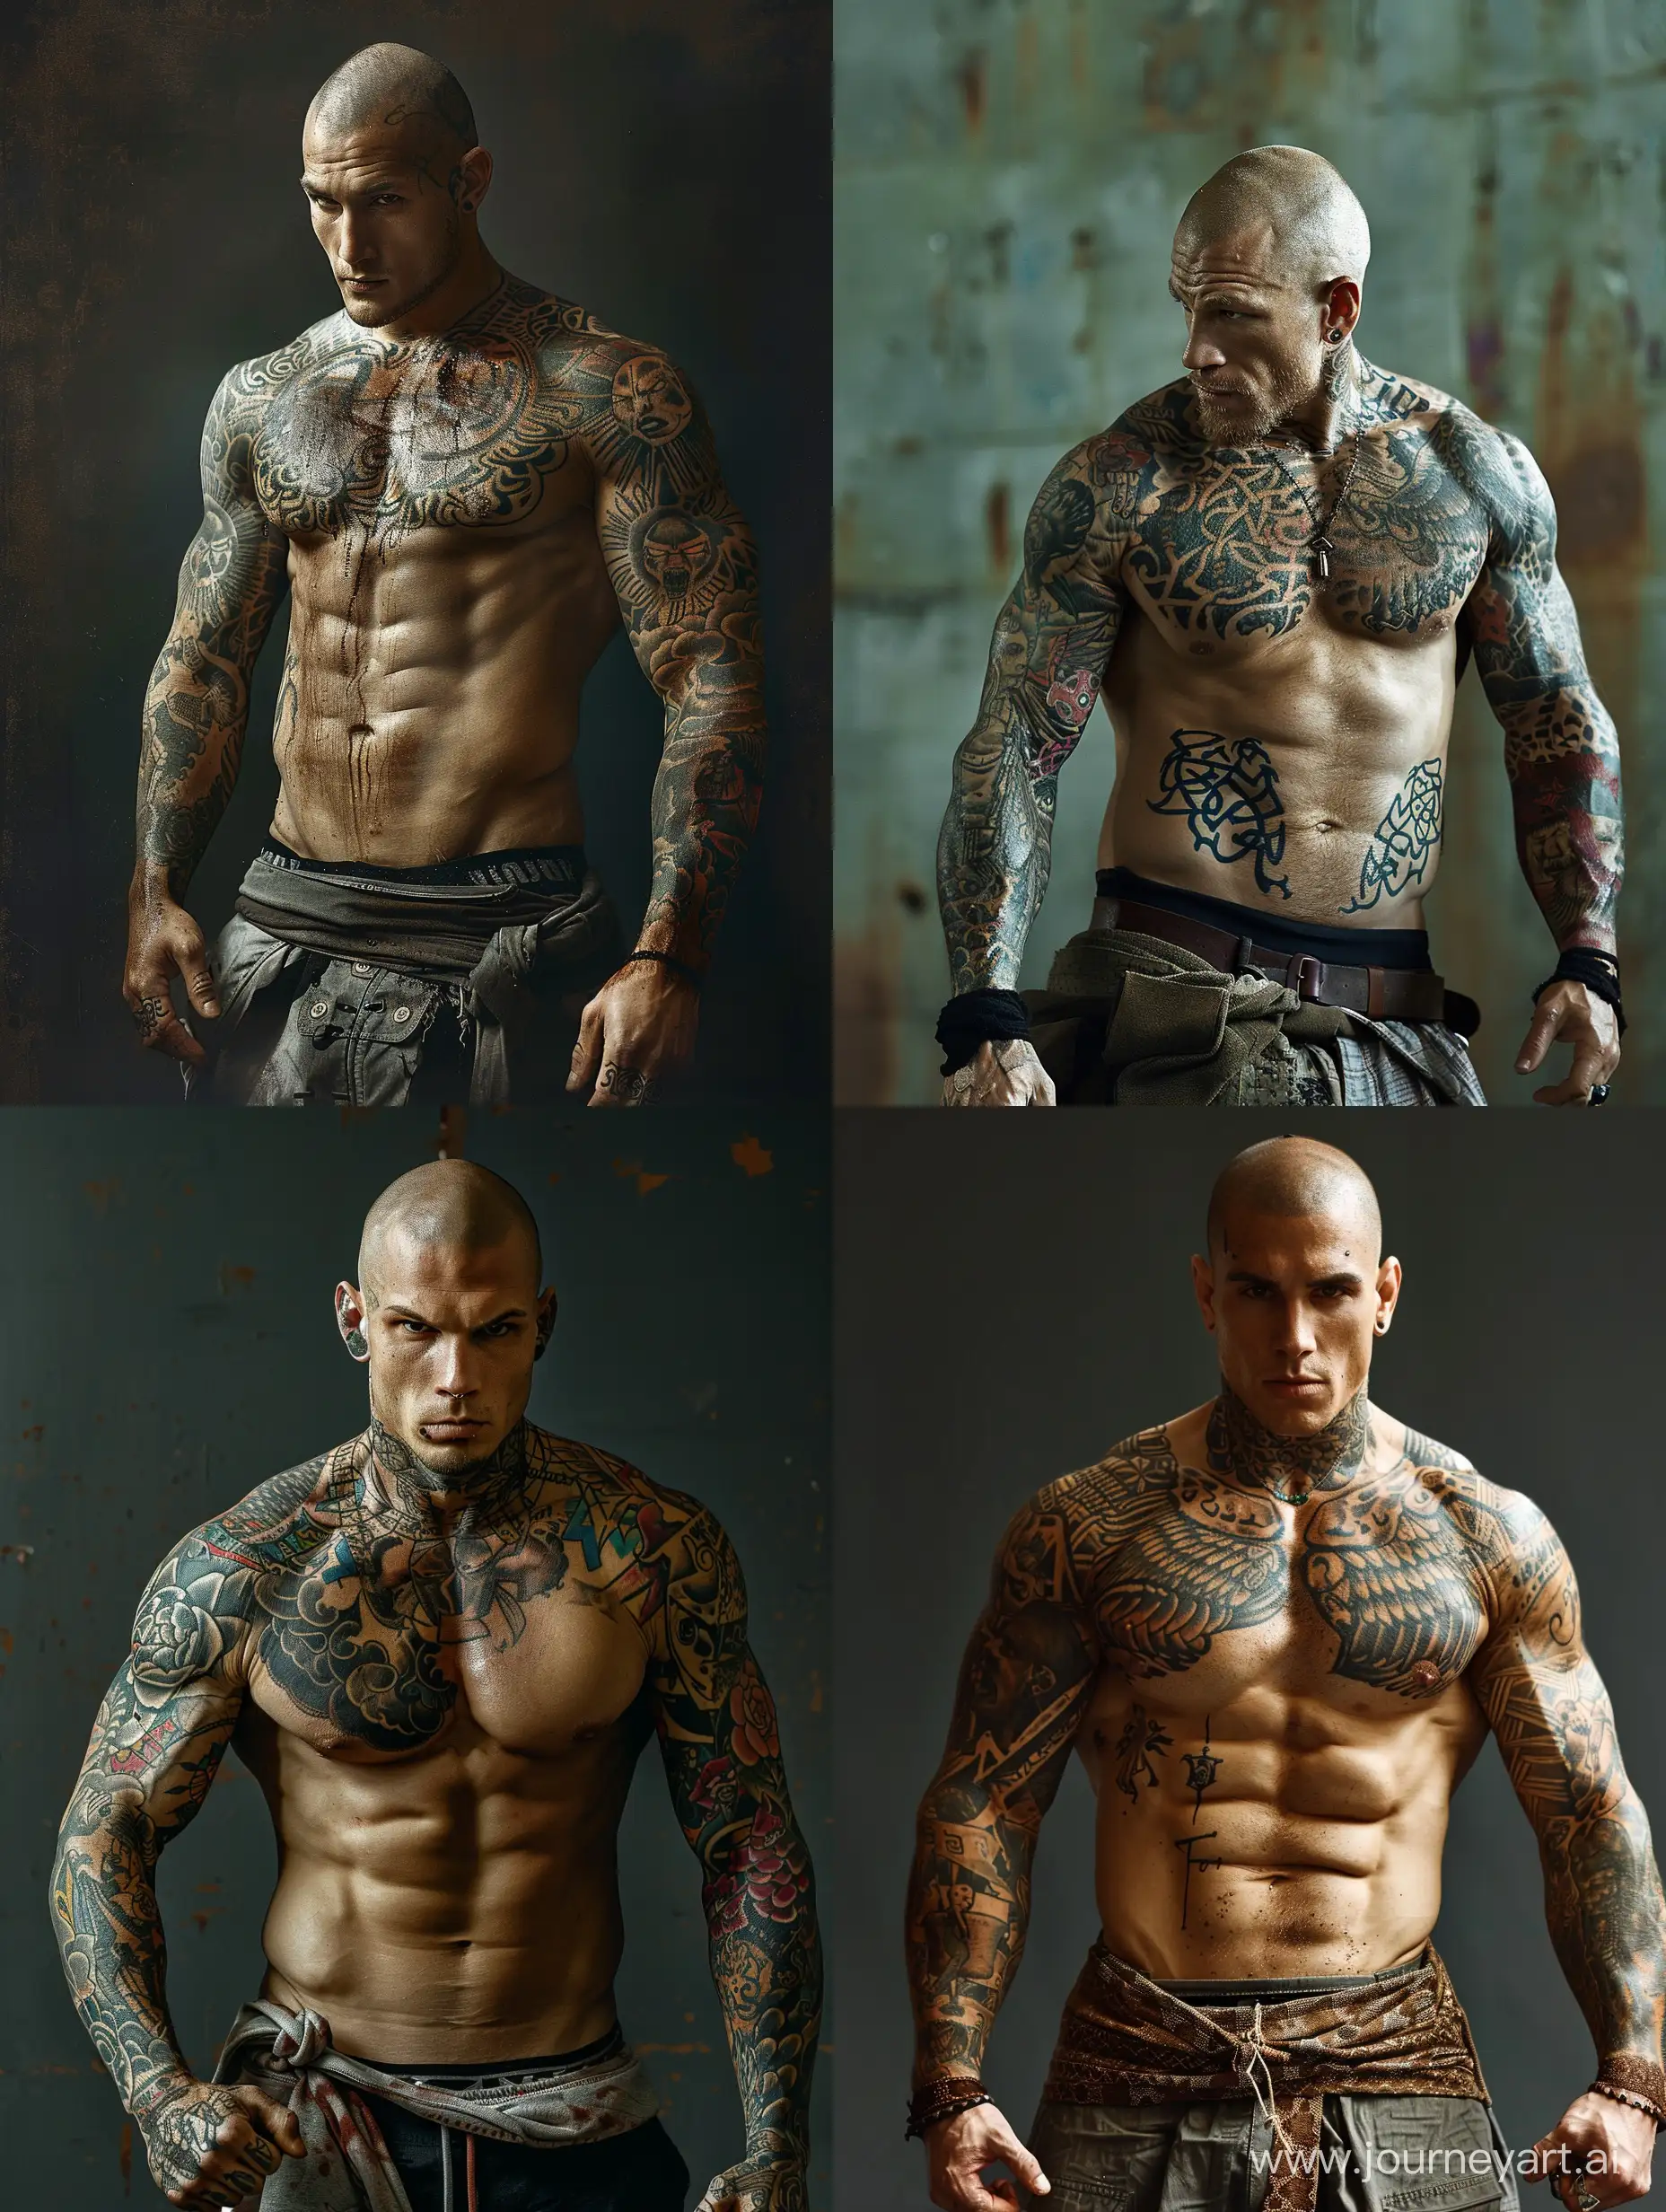 Tattooed-Muscular-Fighter-Engages-in-HandtoHand-Combat-in-Arena